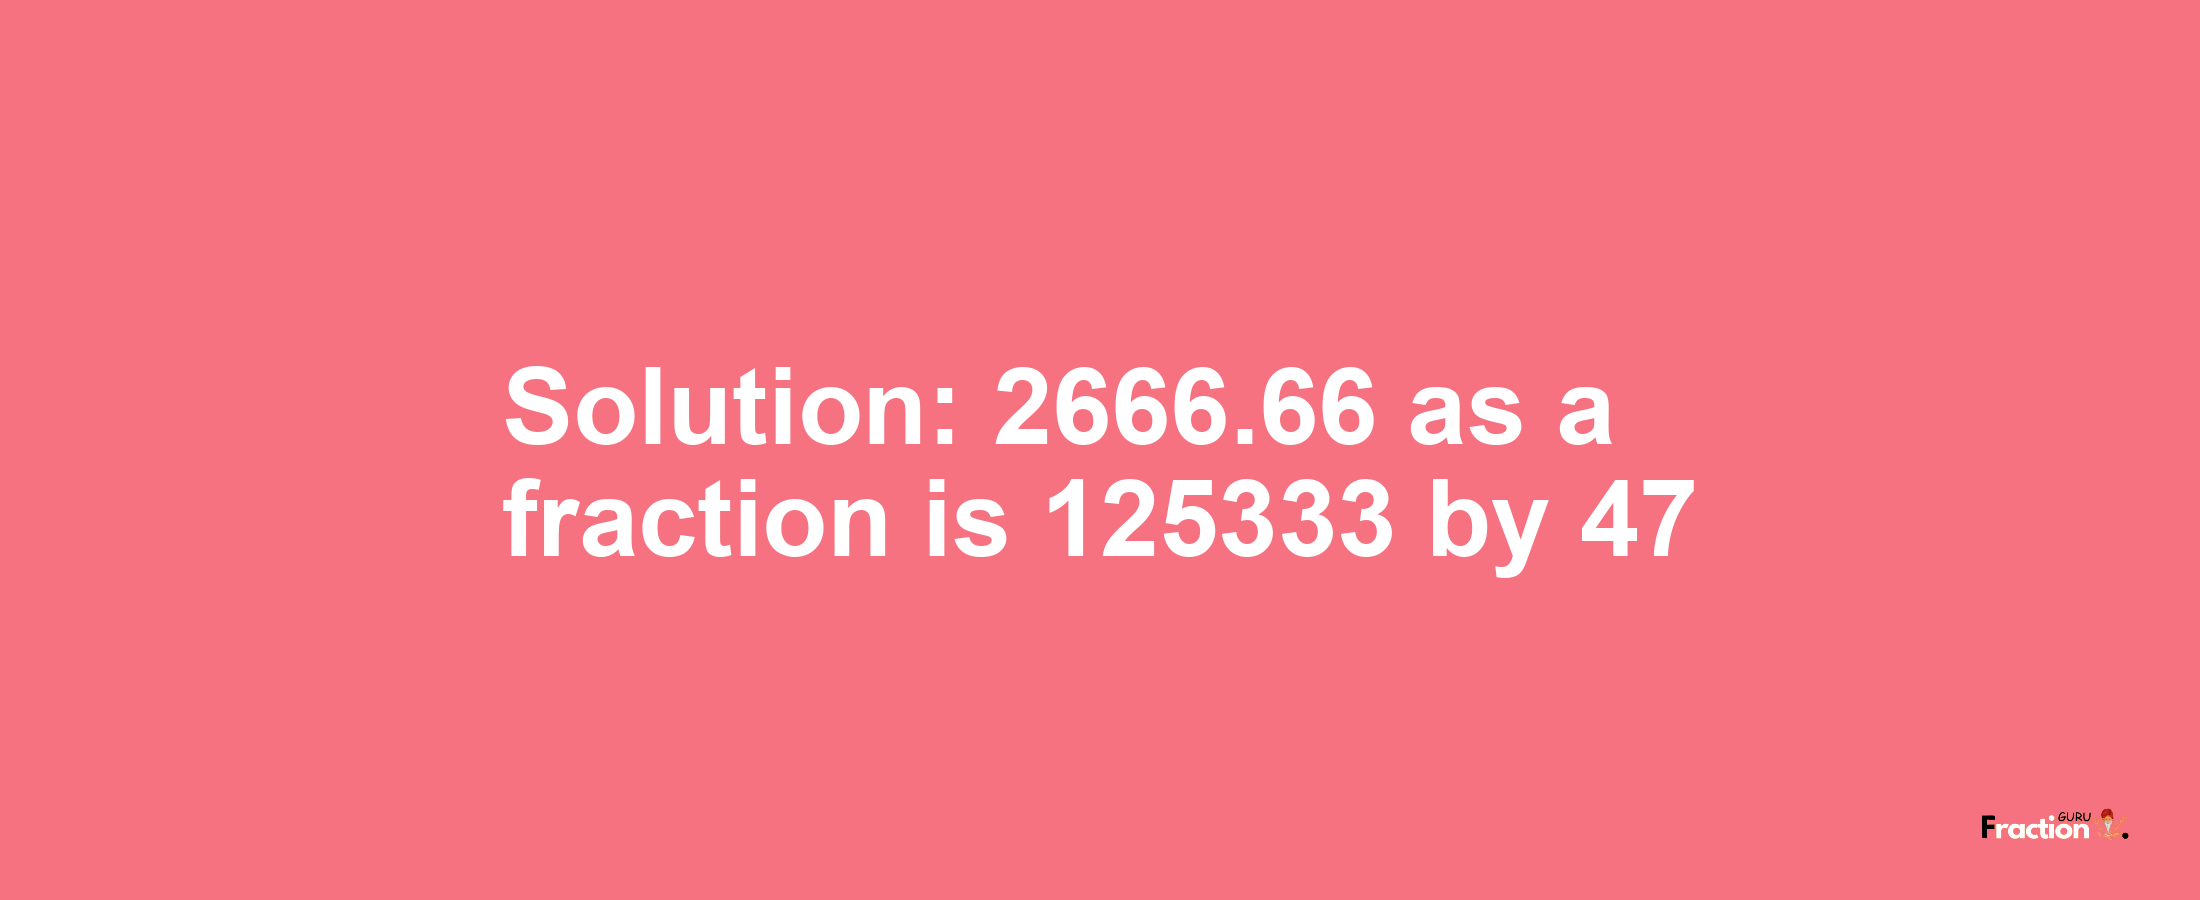 Solution:2666.66 as a fraction is 125333/47